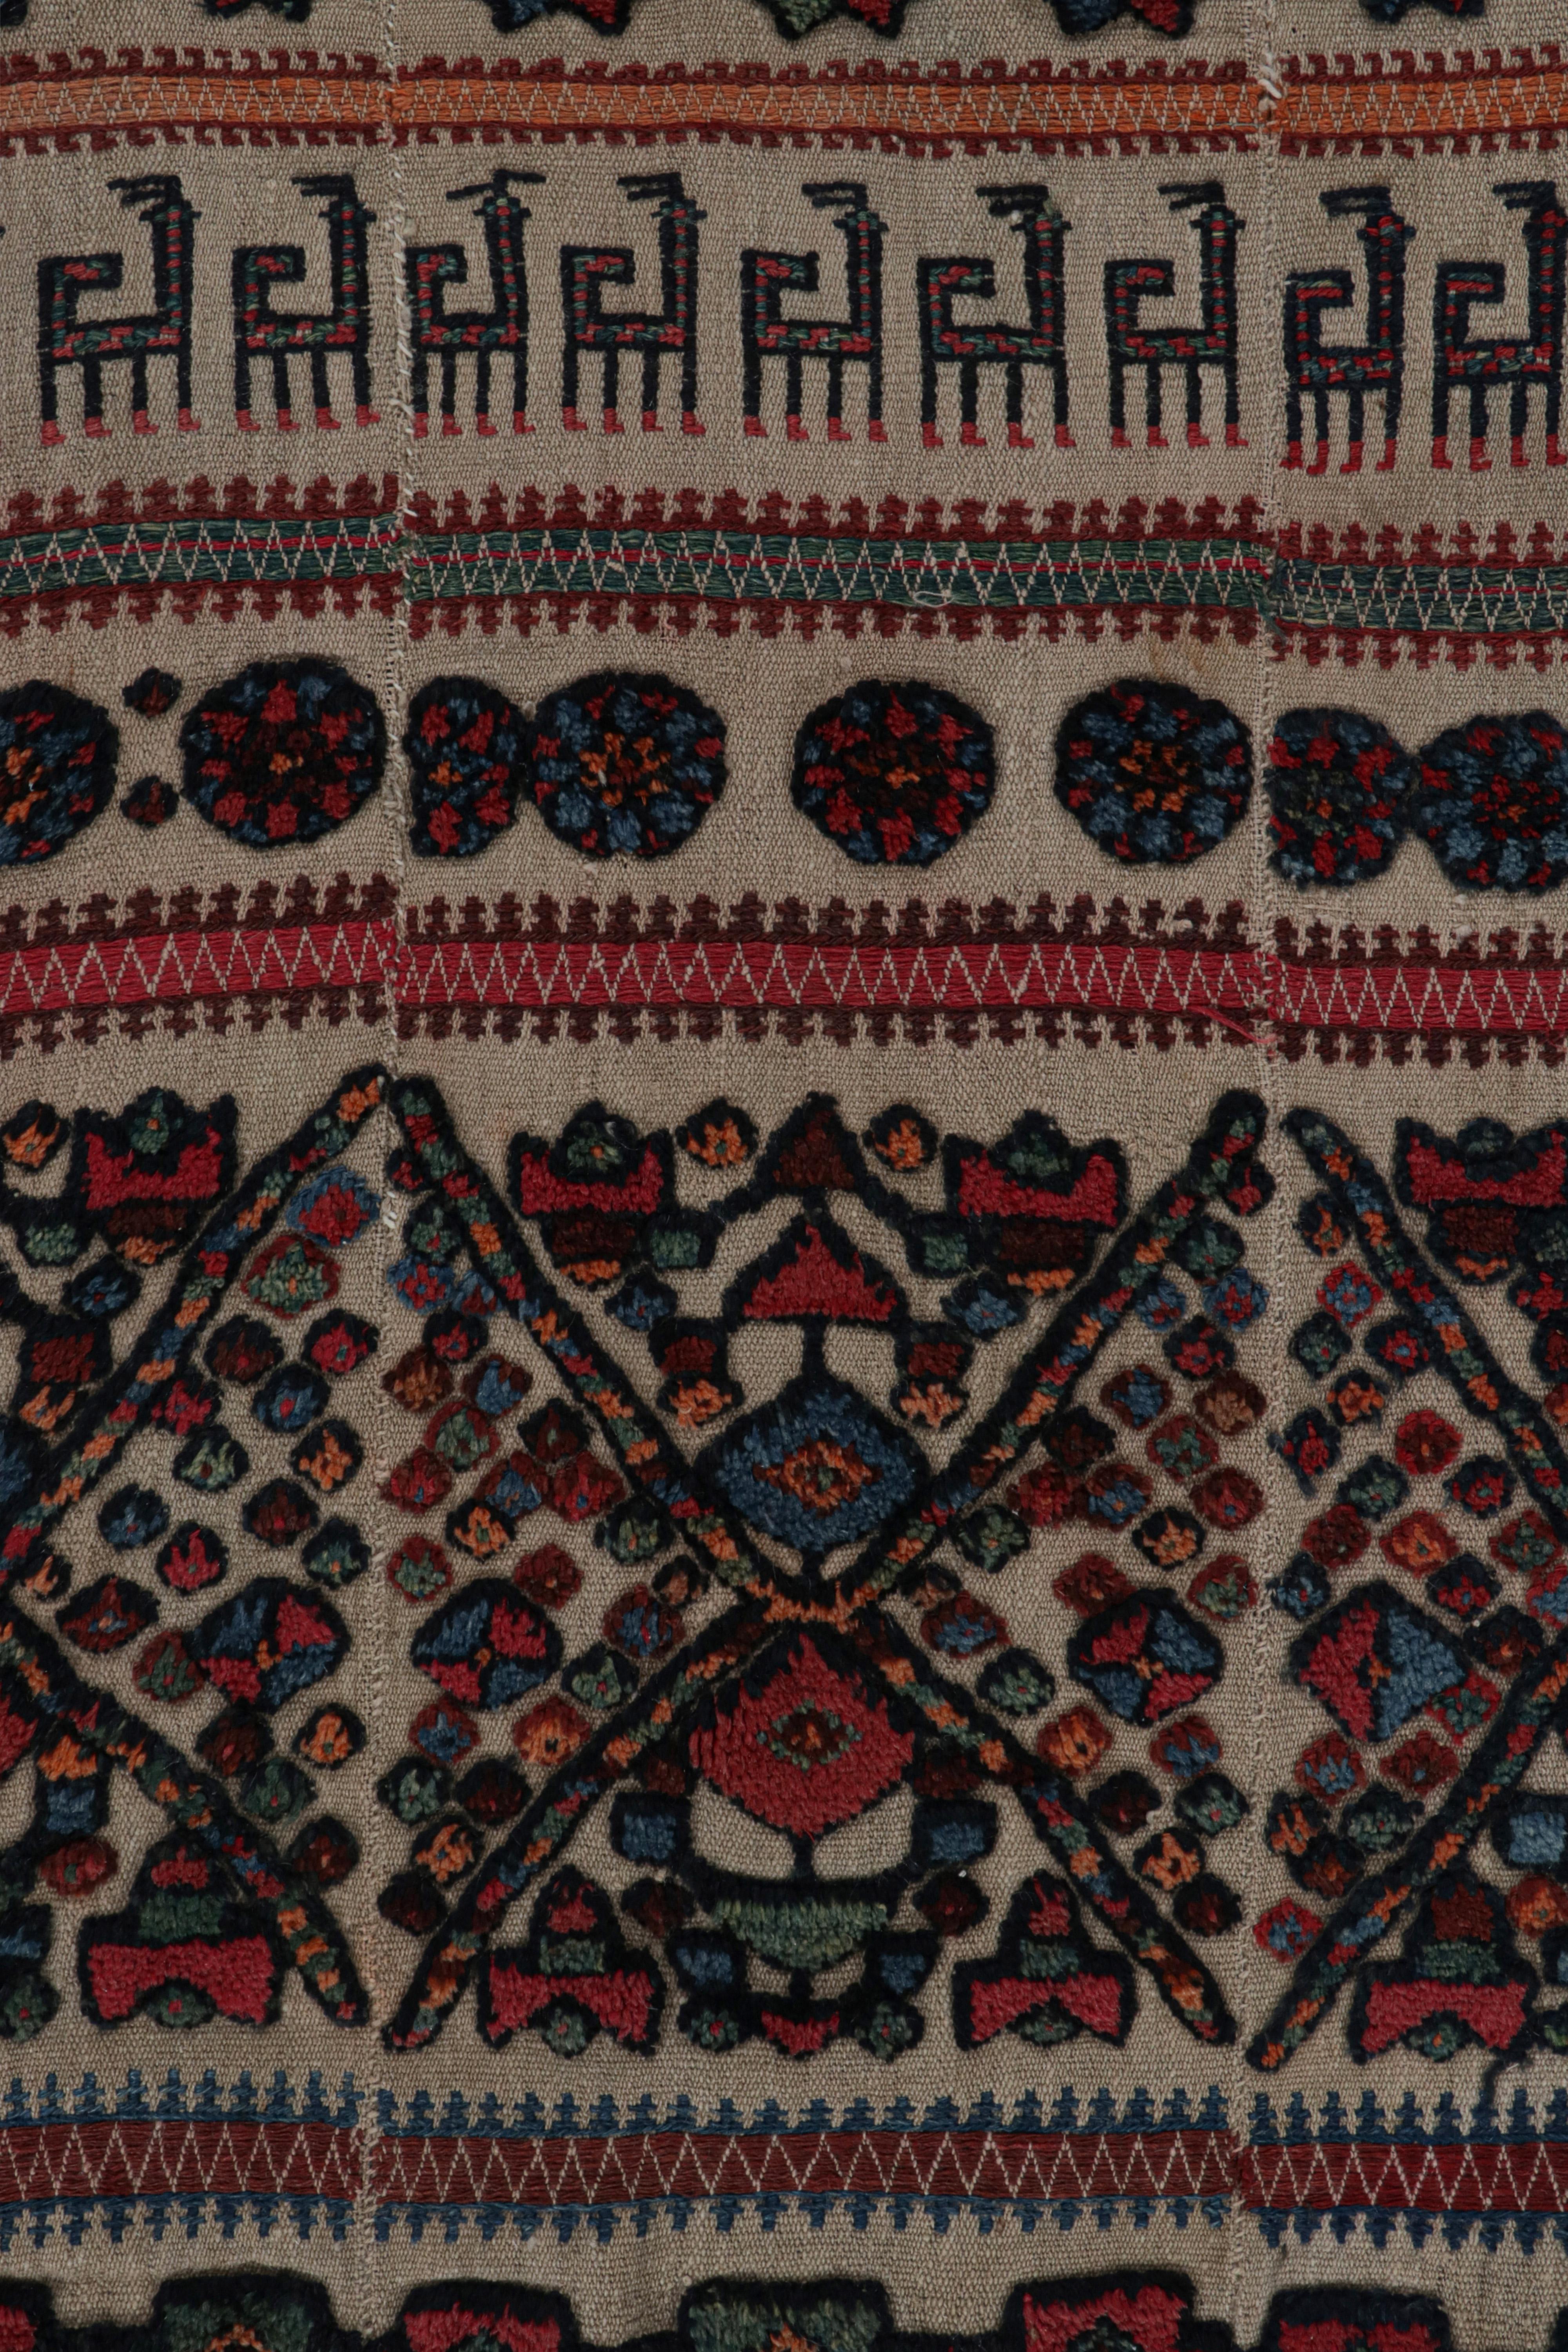 Late 19th Century Antique Persian Horse Cover with Colorful Geometric Patterns, from Rug & Kilim For Sale